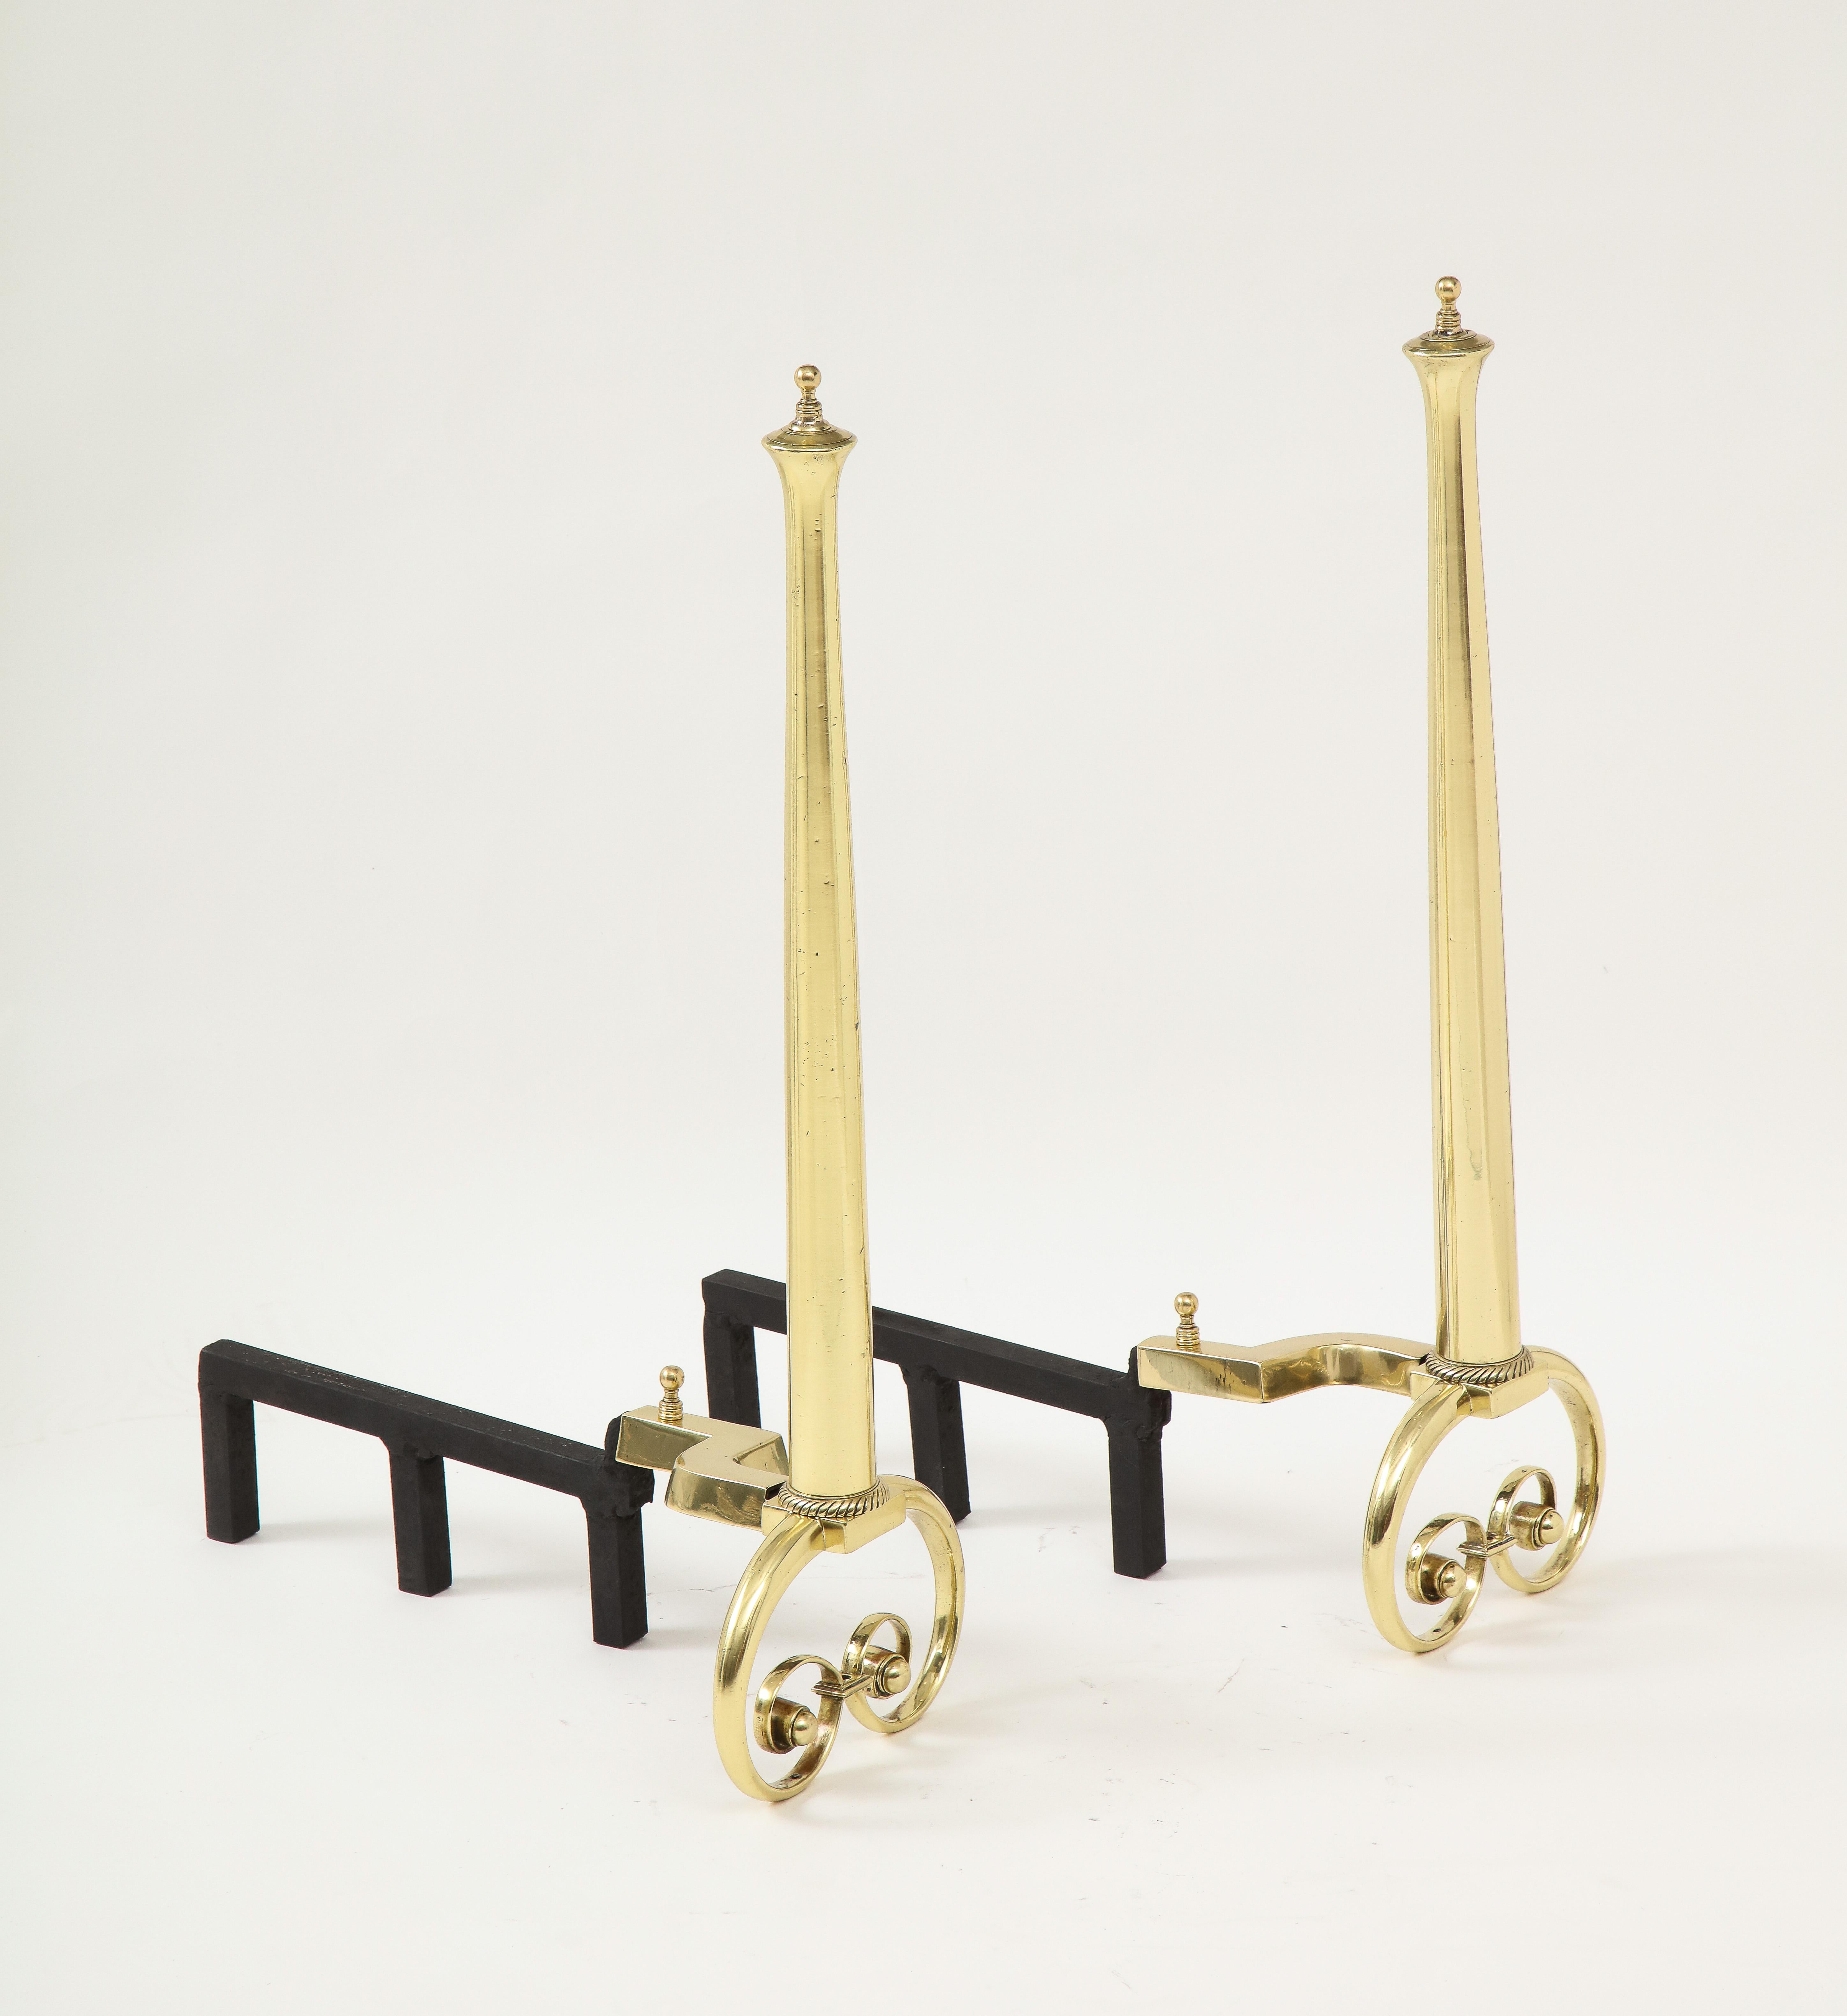 American Art Nouveau Aged Brass Andirons For Sale